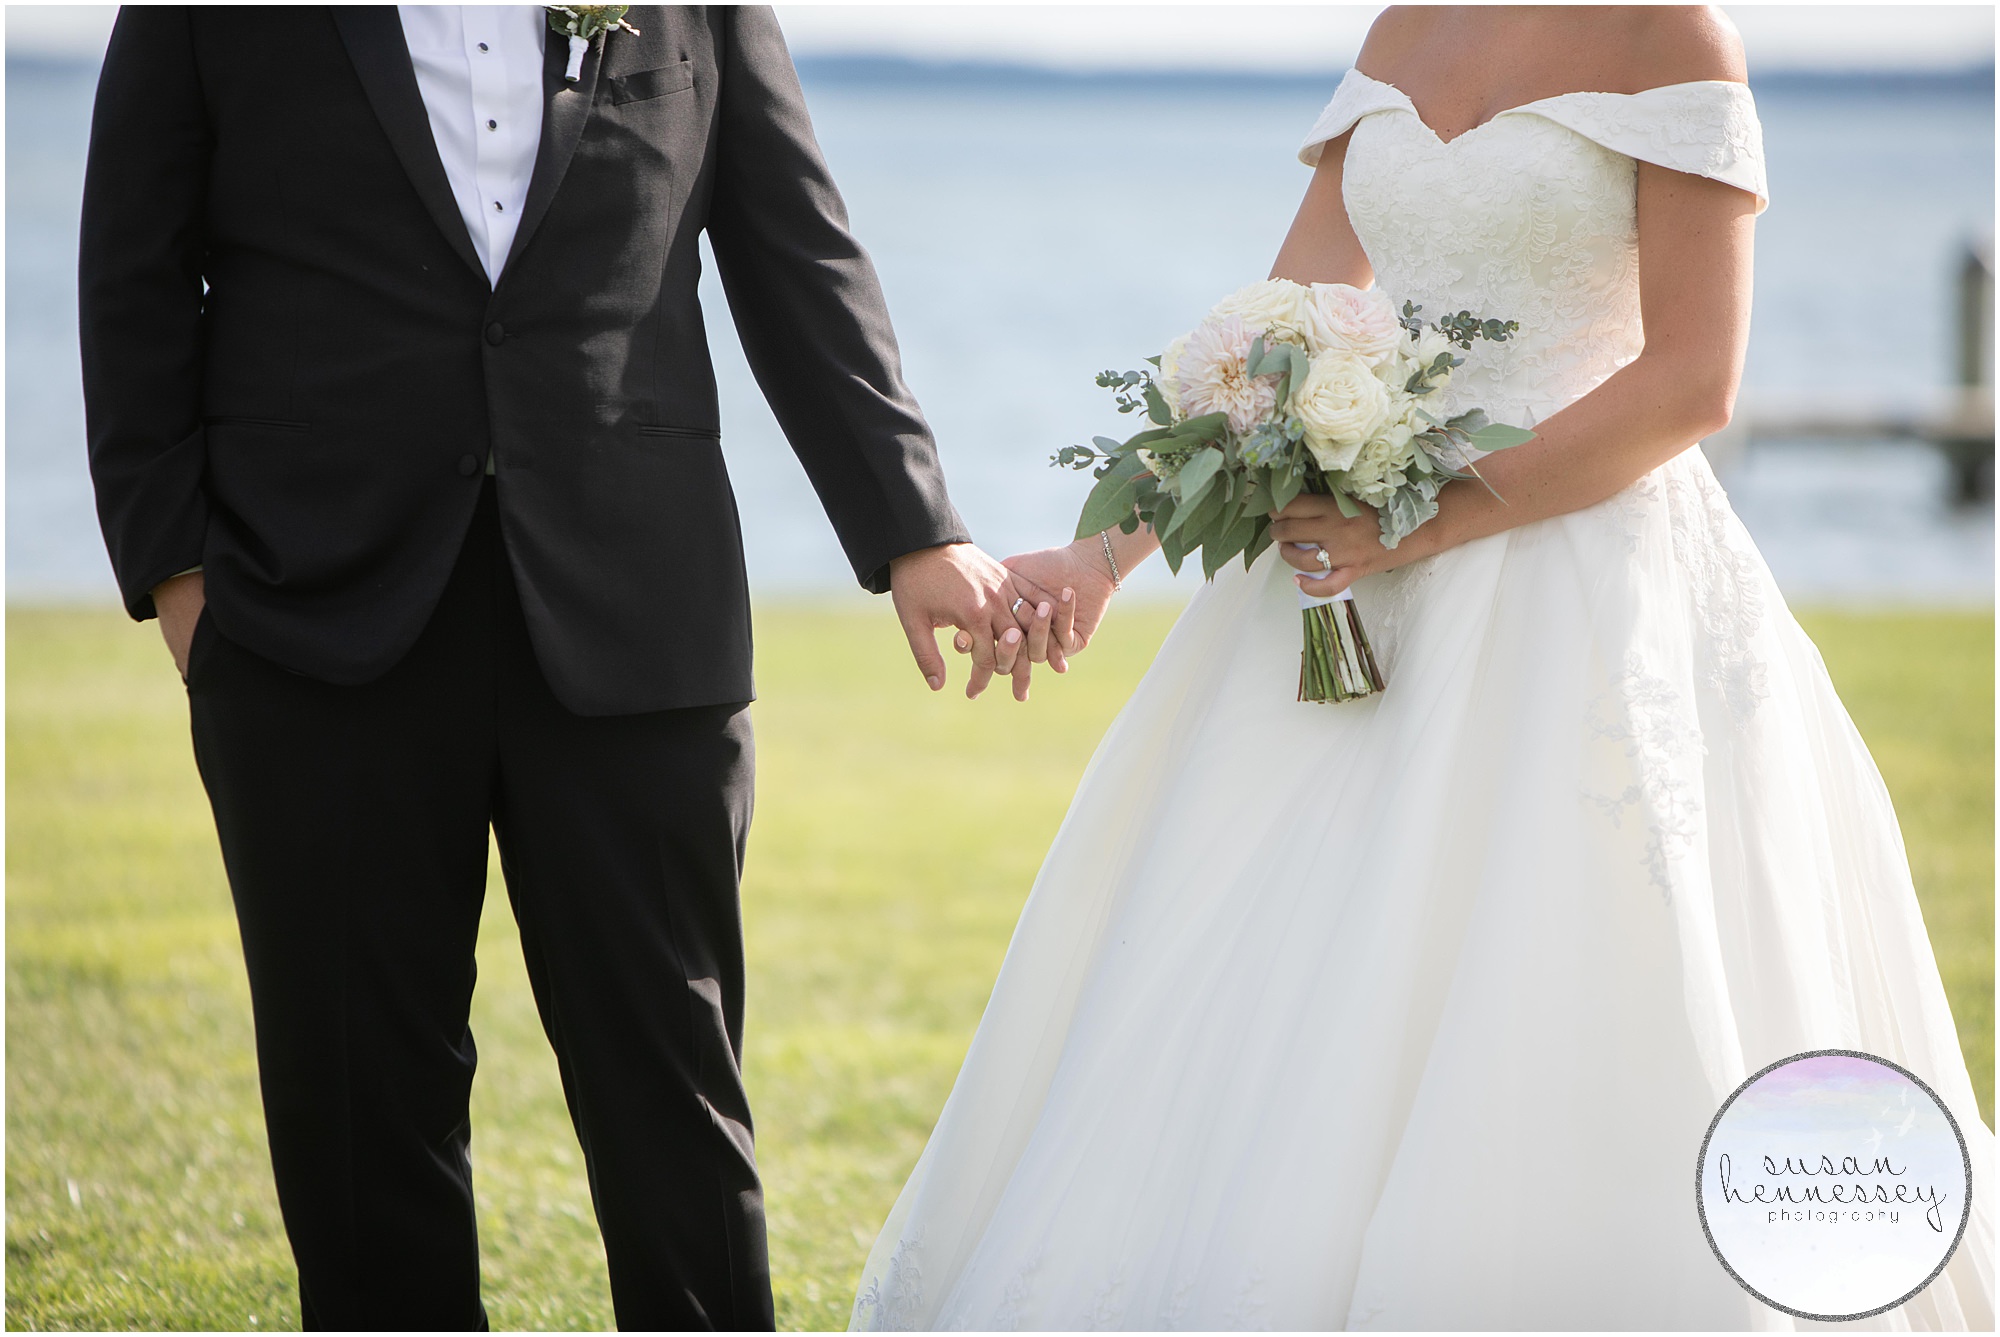 Detail of bride's bouquet while couple holds hands